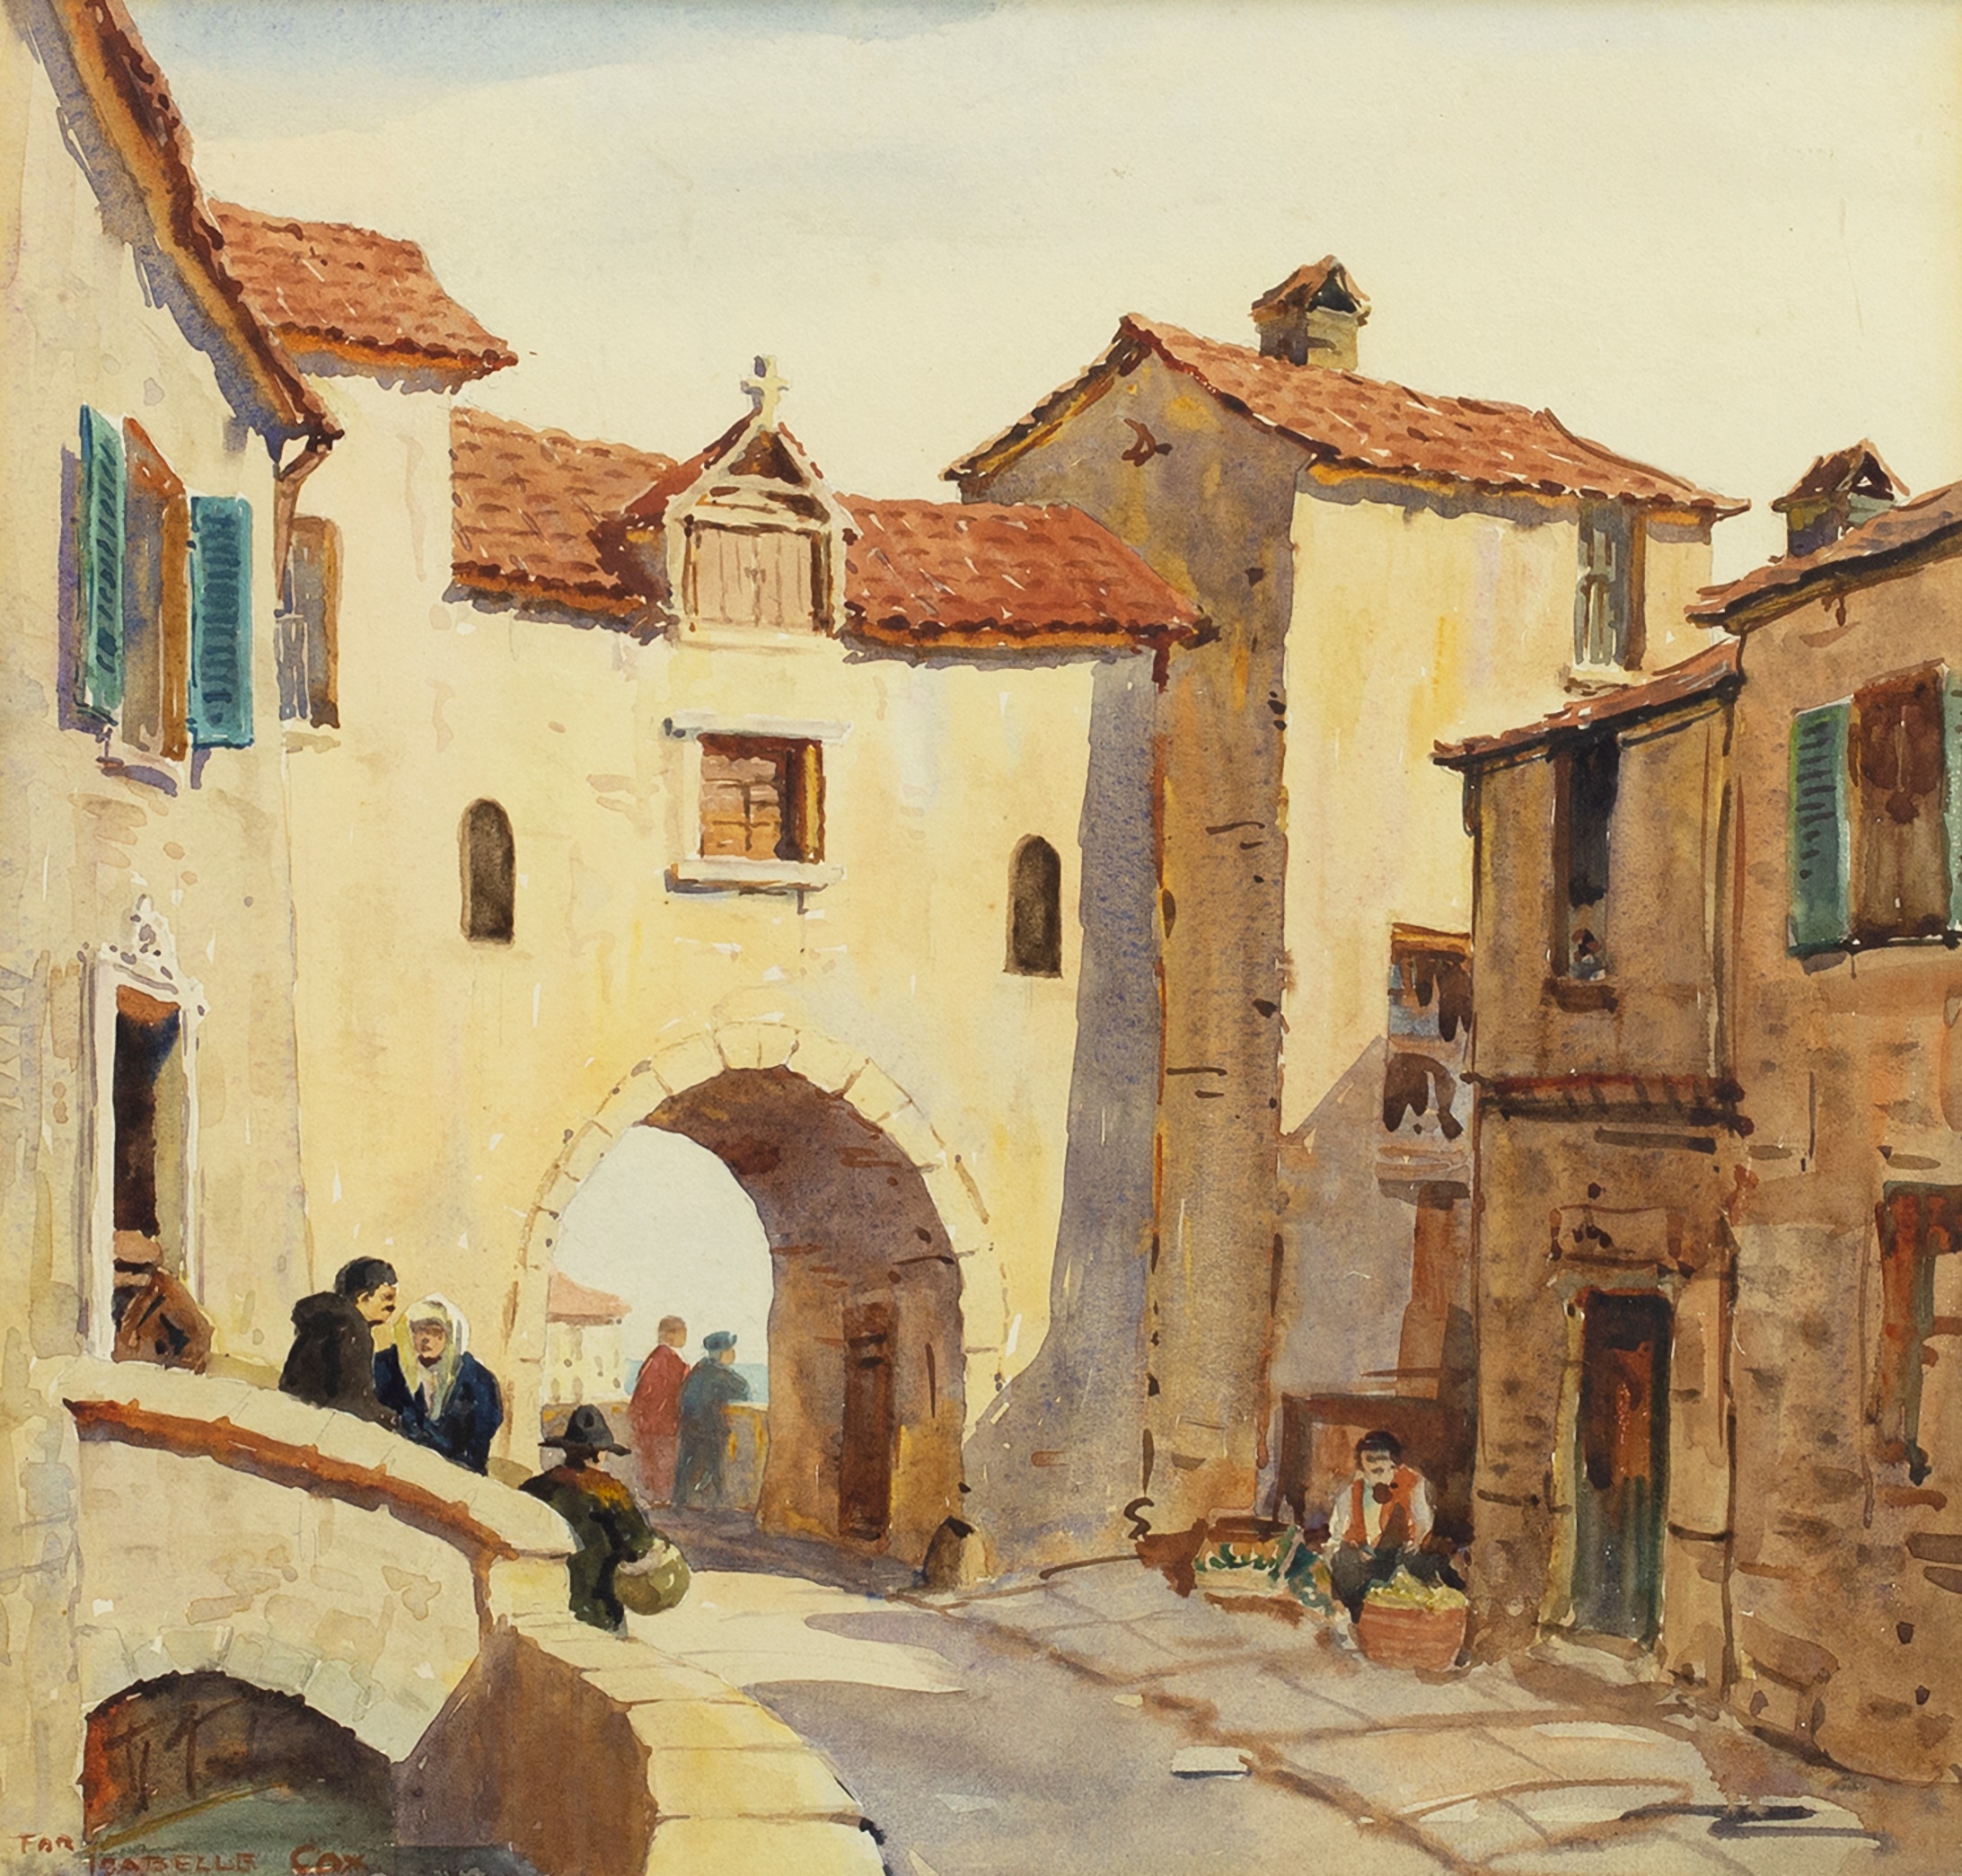 ITALIAN COASTAL VILLAGE SCENE, A WATERCOLOUR IN THE STYLE OF SIR ERNEST DARYL LINDSAY - Image 2 of 2